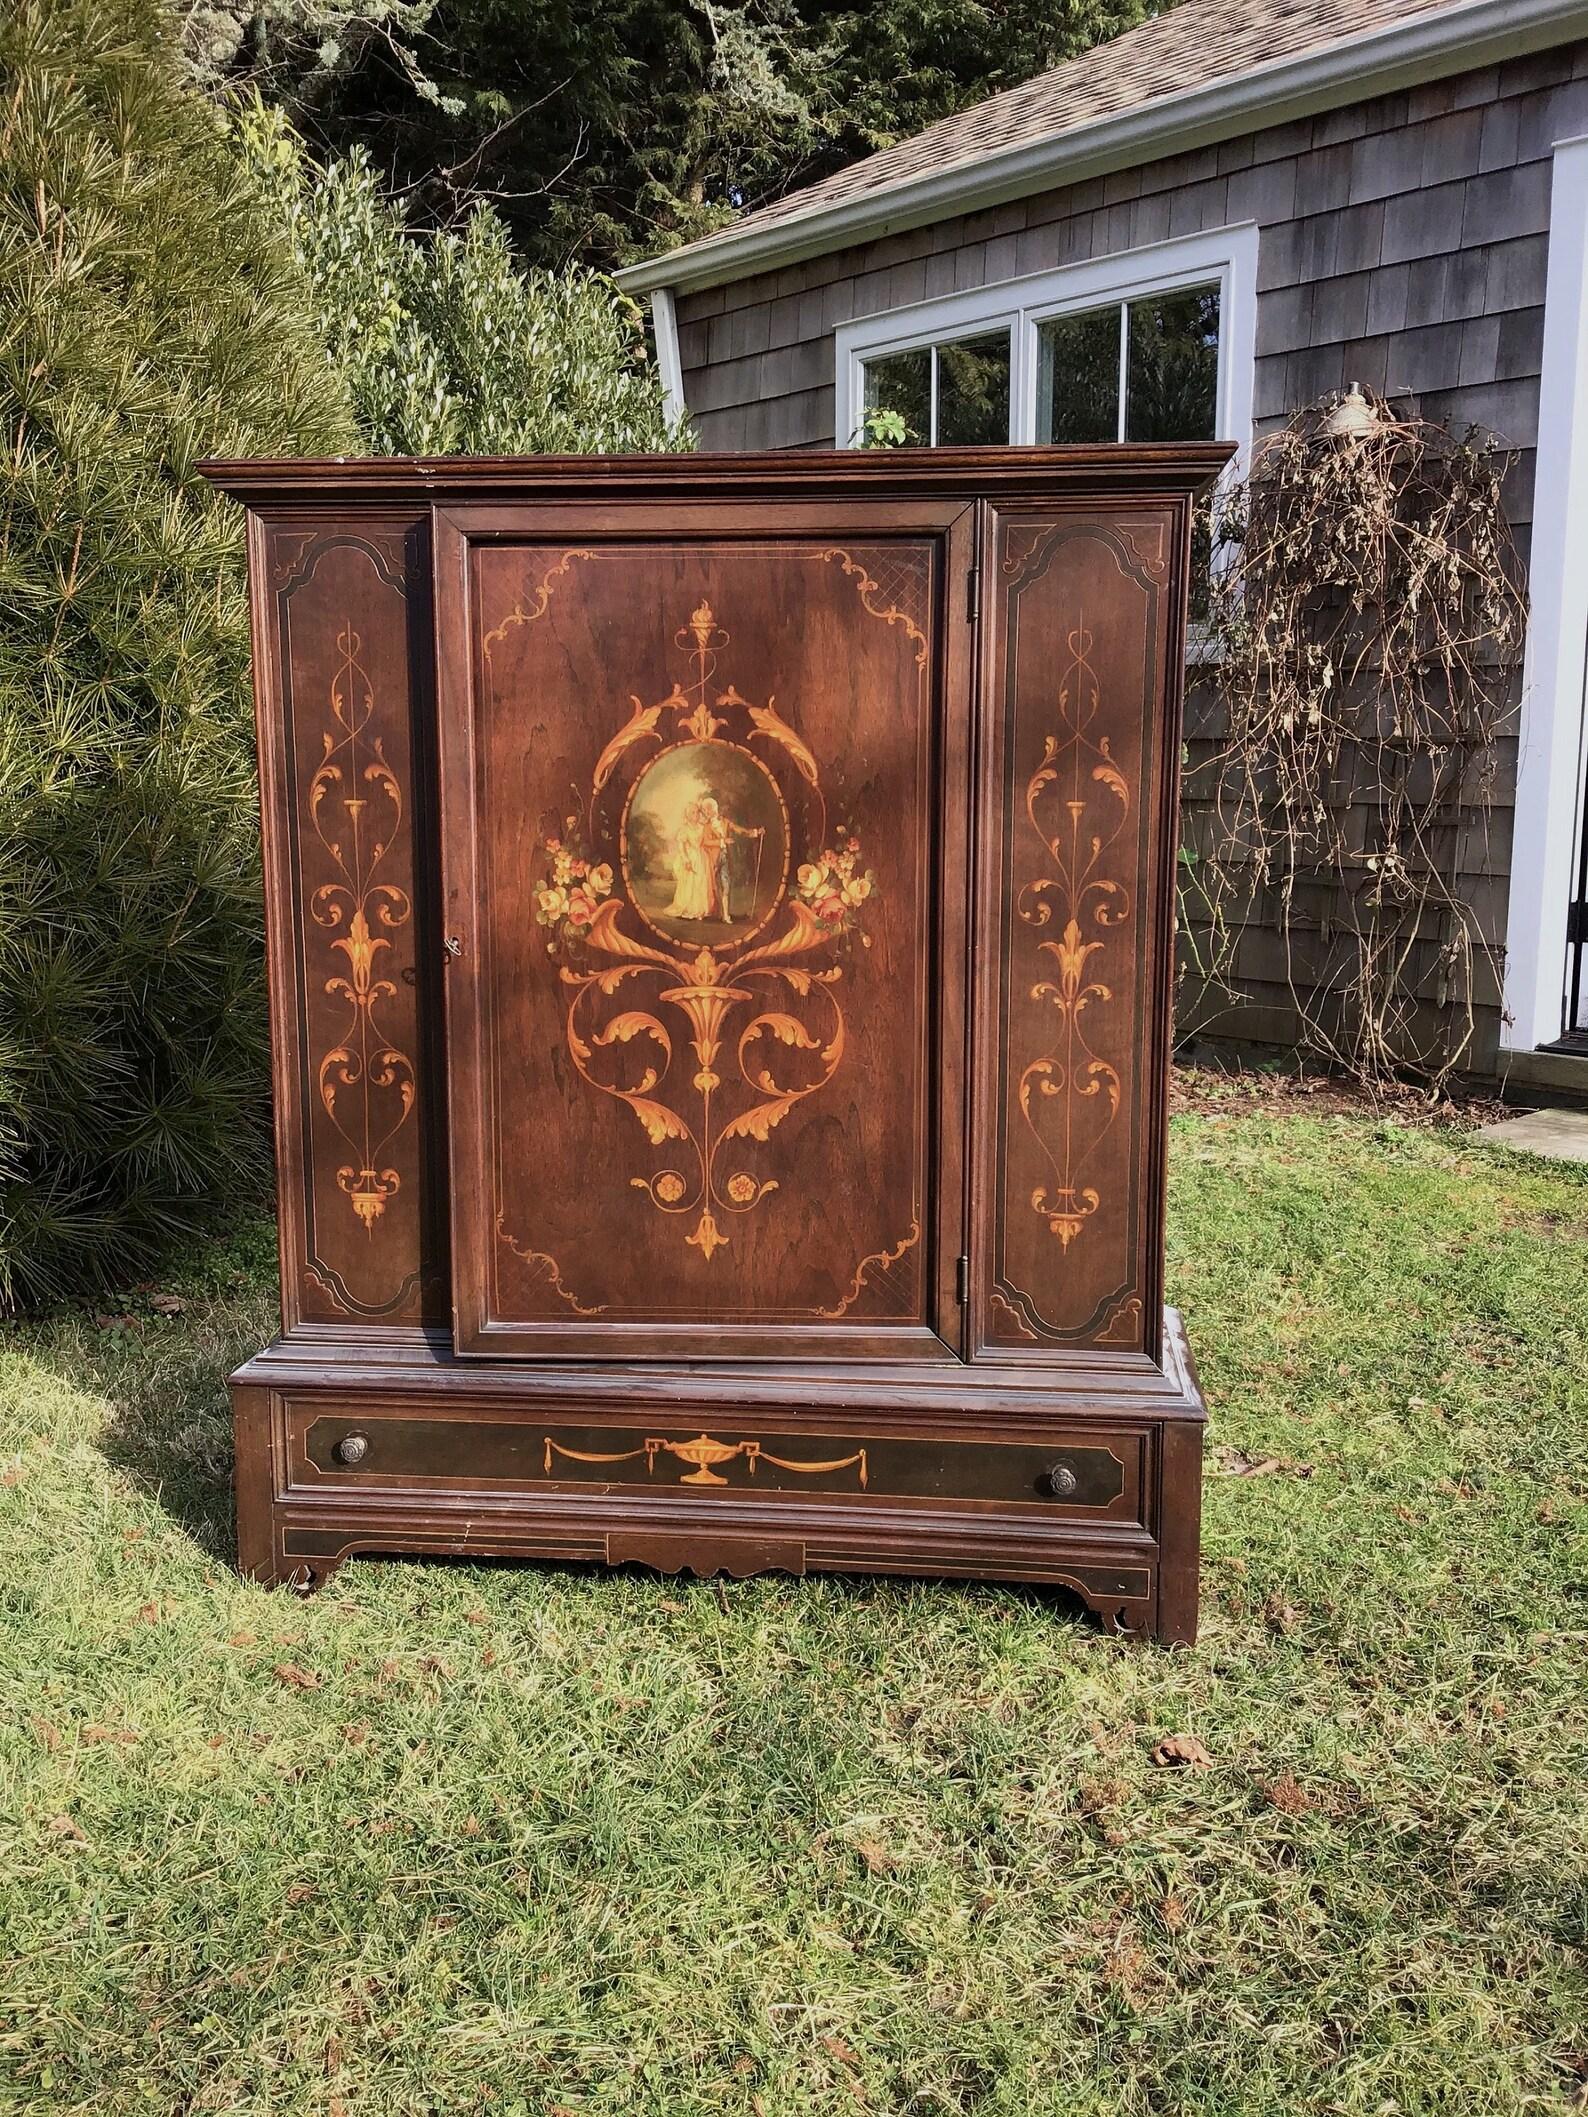 Antique French armoire is hand painted with French scenes on the Victorian wardrobe.
   